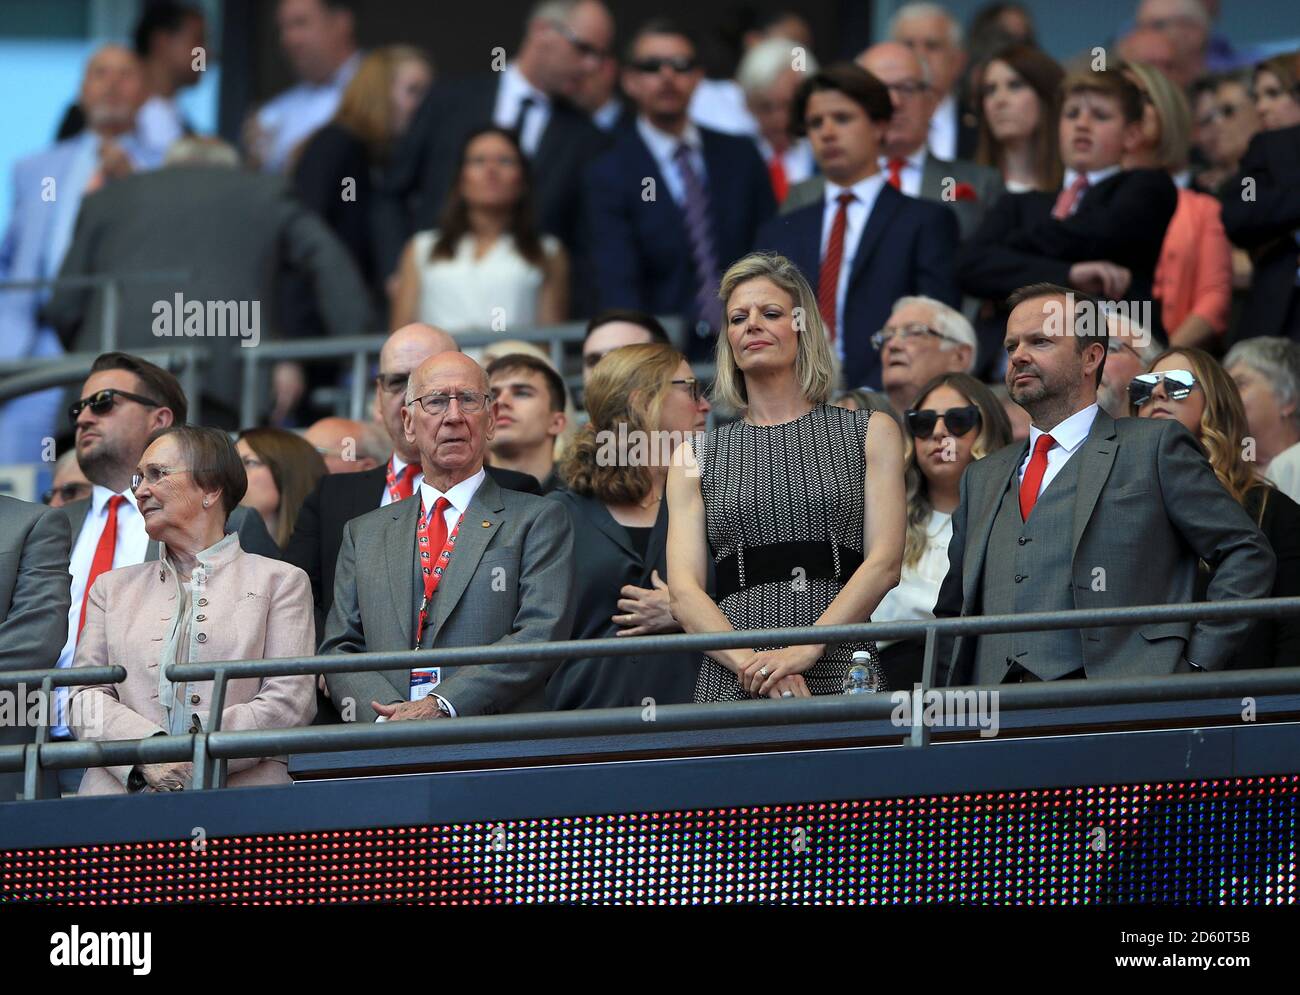 Sir Bobby Charlton (2nd left) with wife Norma Ball (left), Manchester United chief executive Ed Woodward (right) Stock Photo